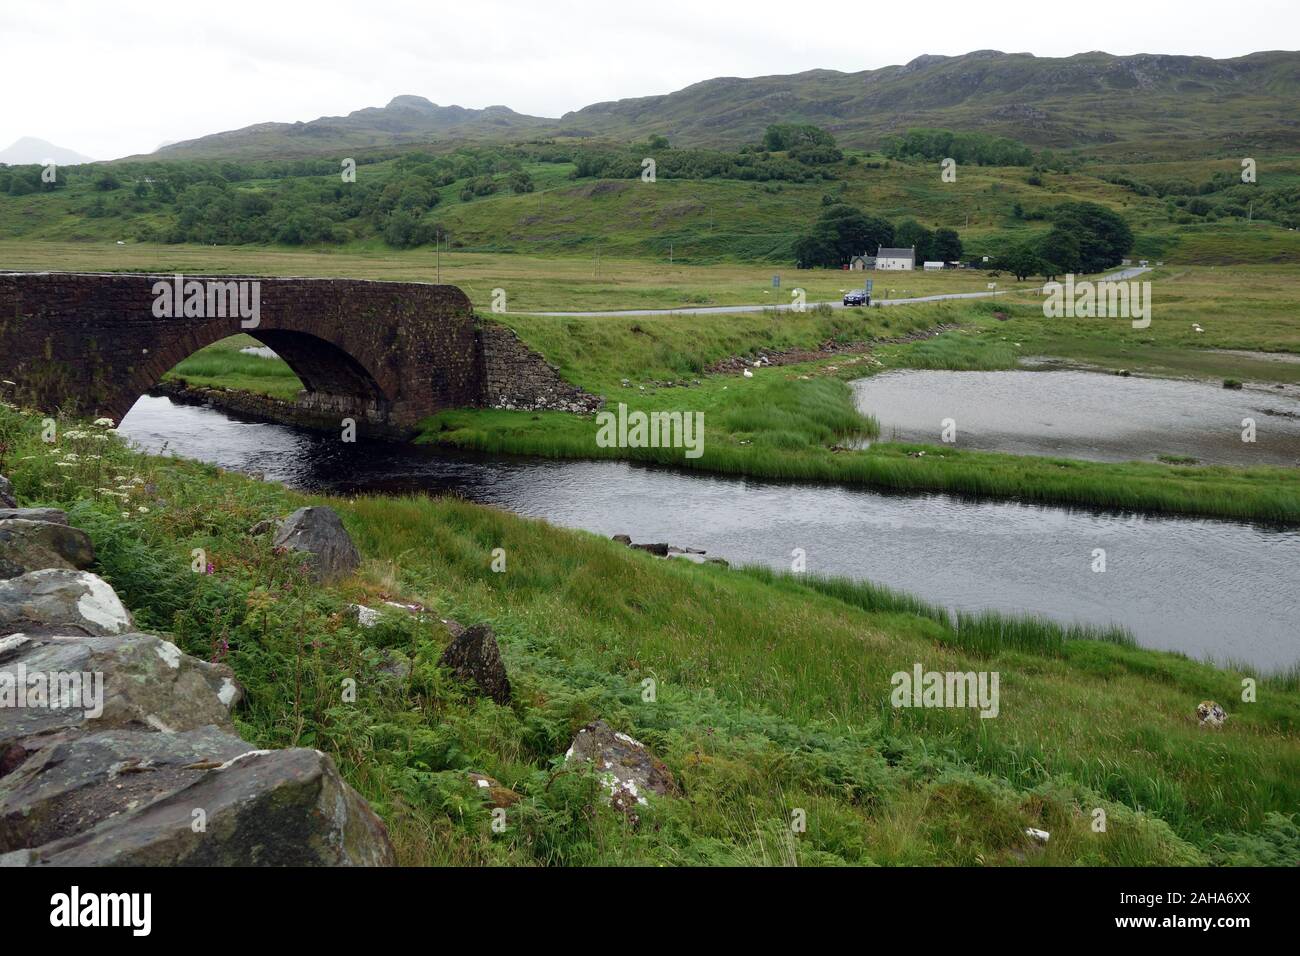 The Stone Road Bridge over the River Kishorn at the Start of the Bealach na Ba Pass to Applecross, North West, Scottish Highlands, Scotland, UK. Stock Photo